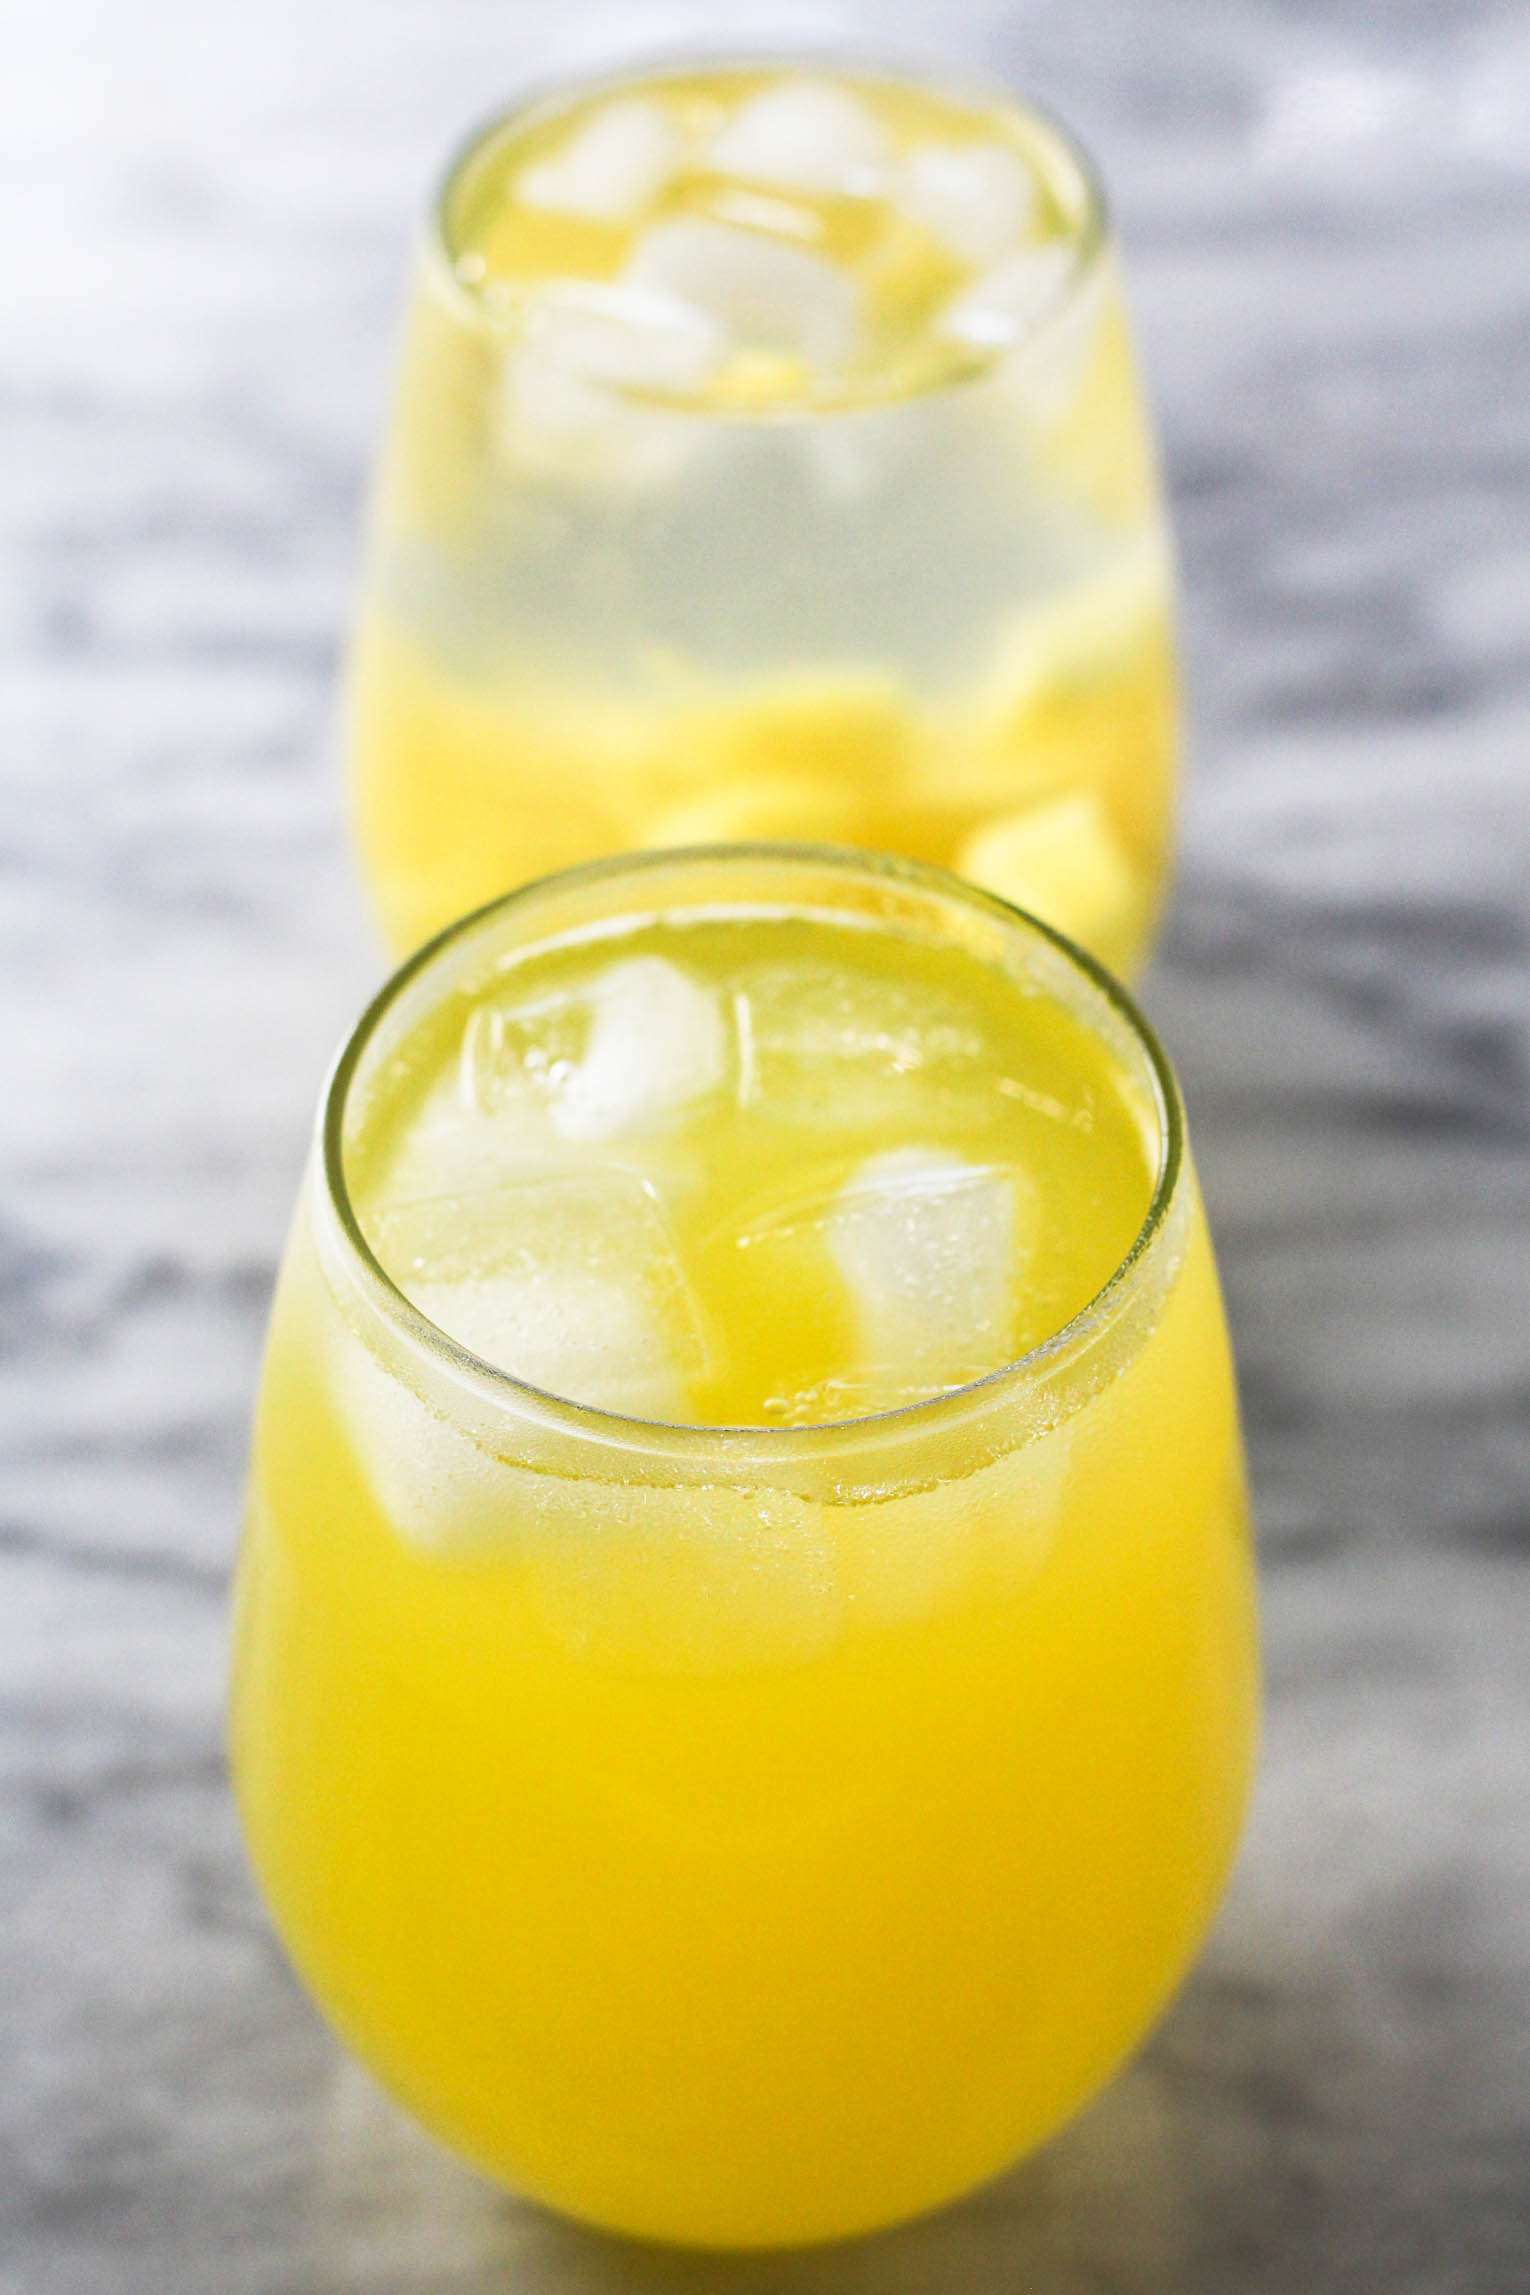 Two glasses of pineapple water with ice cubes. The glasses are standing on marble background.